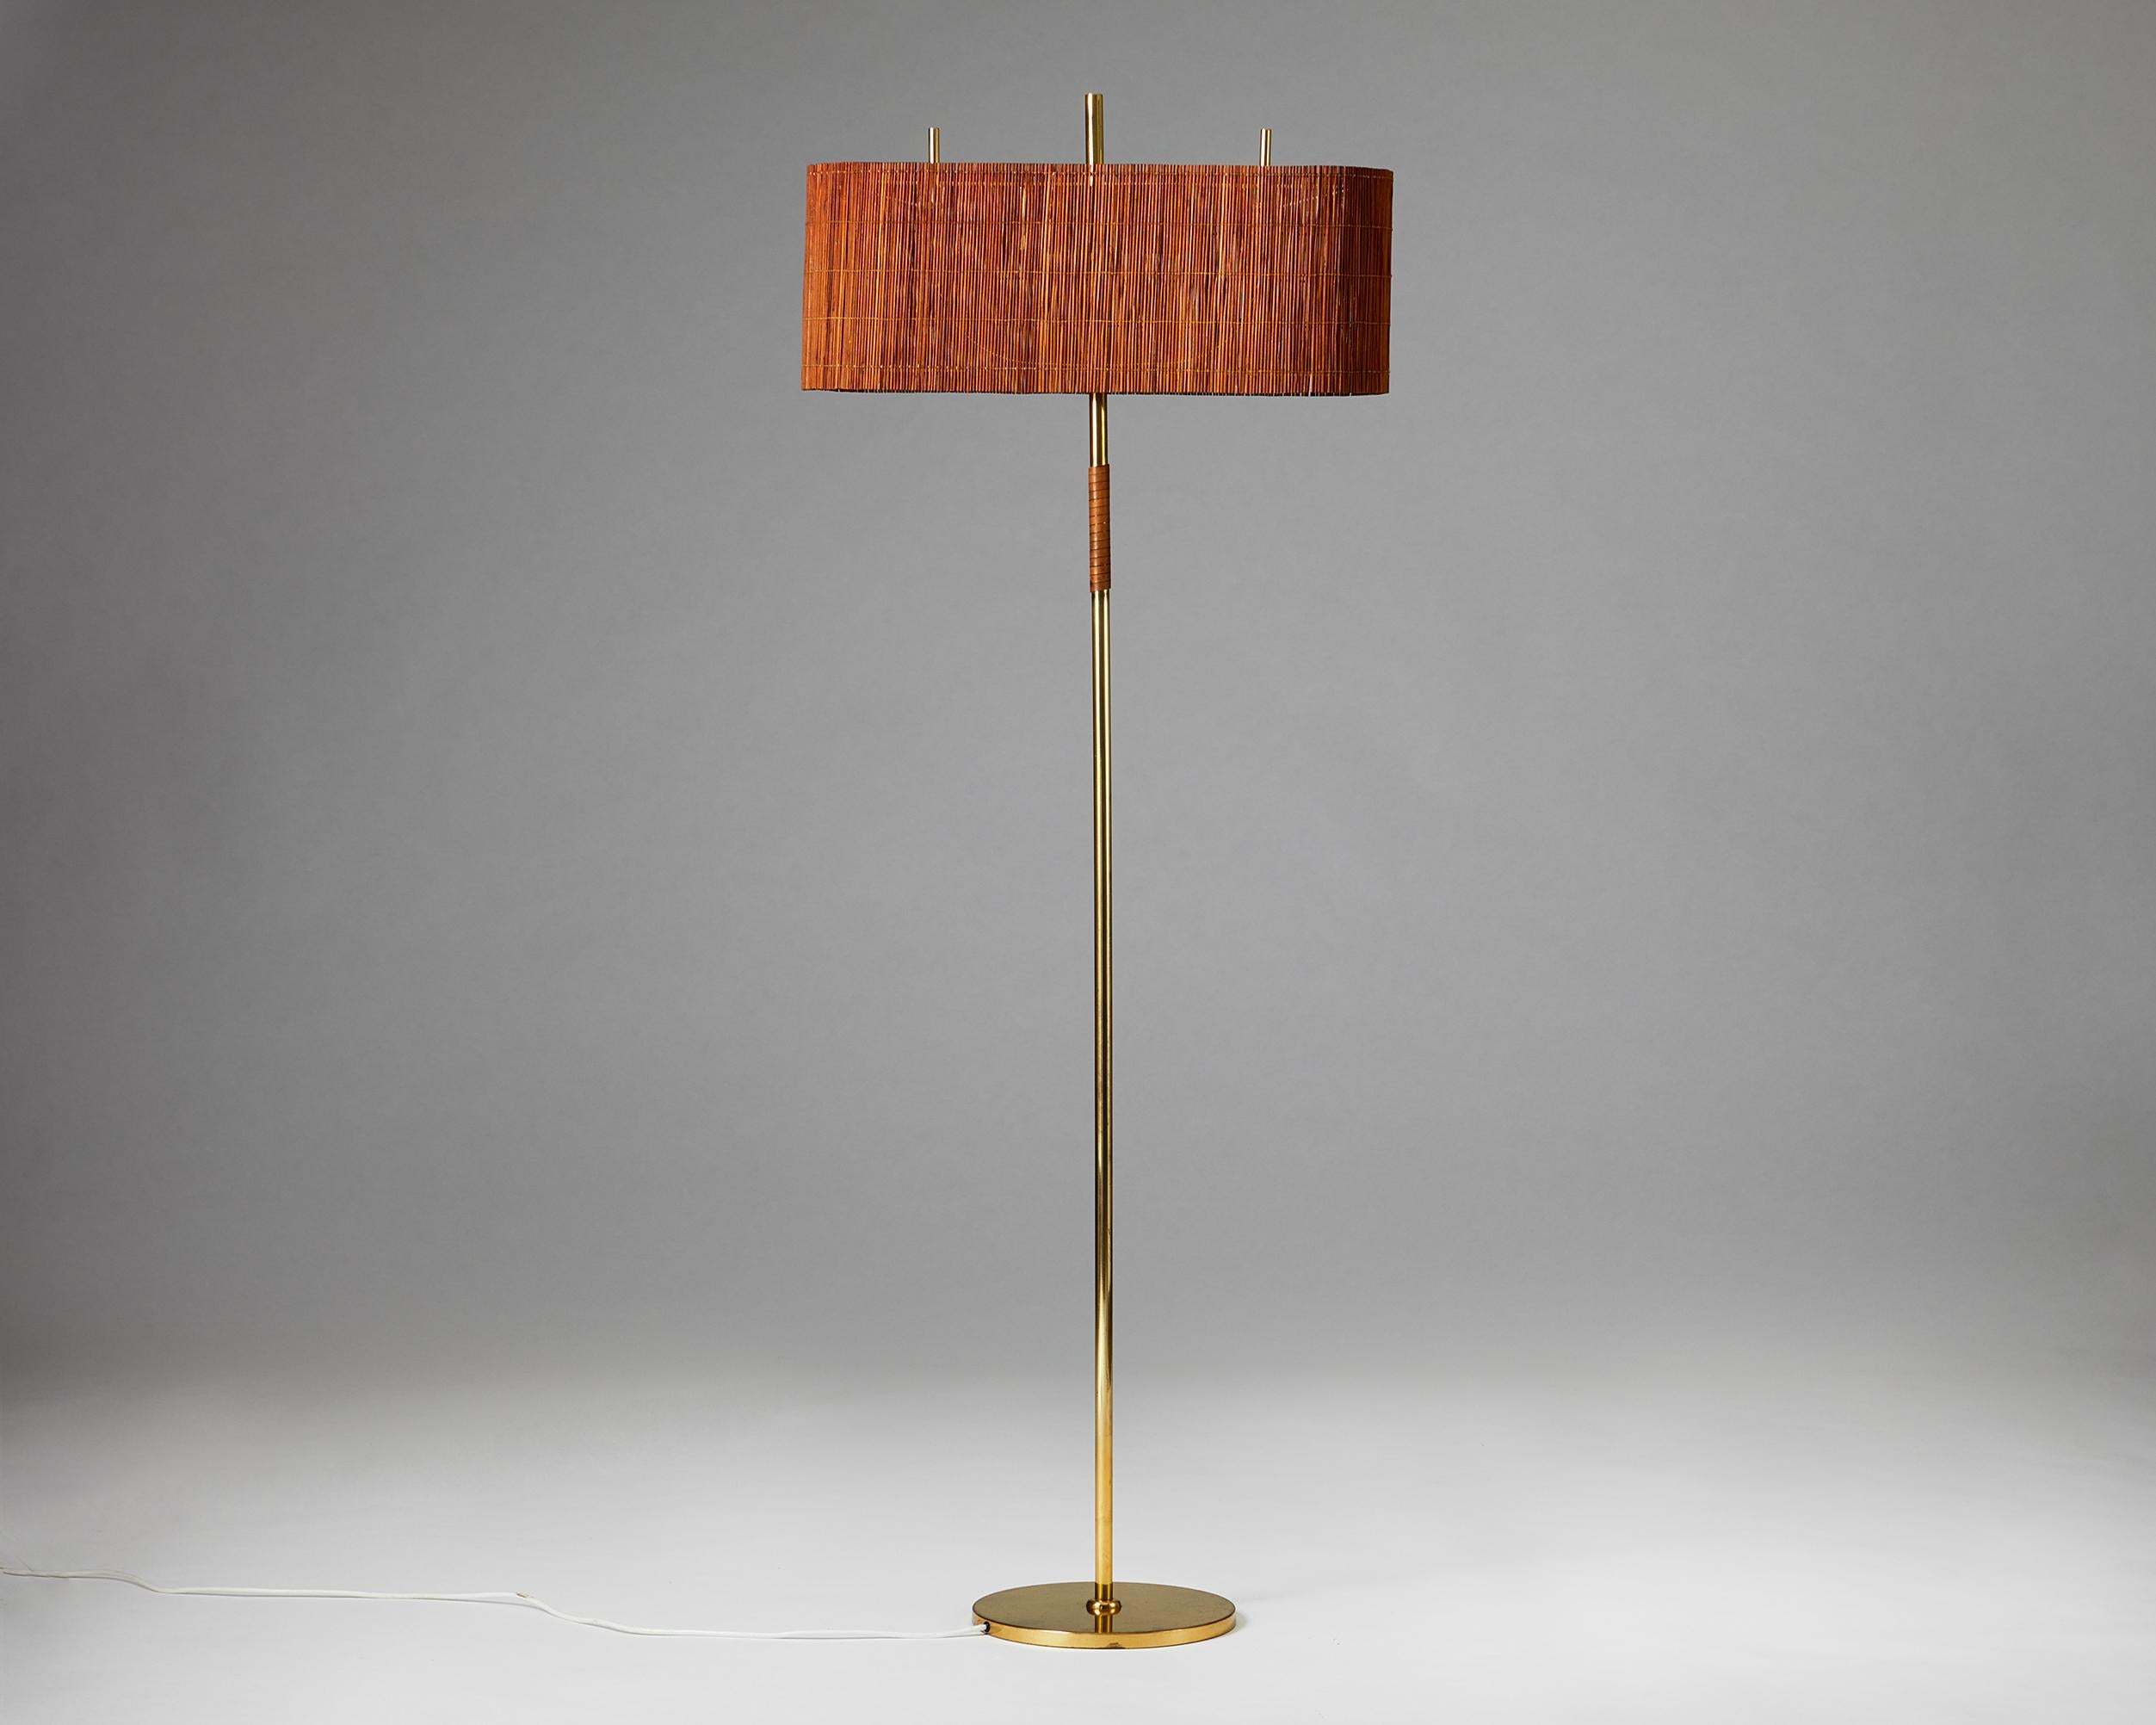 Floor lamp model 9621 designed by Paavo Tynell for Taito Oy,
Finland, 1940s.

Brass, slatted wood shade, leather.

Stamped 9621.

From a private Finnish collection.

Paavo Tynell is one of the most important 20th-century lighting designers. He was a